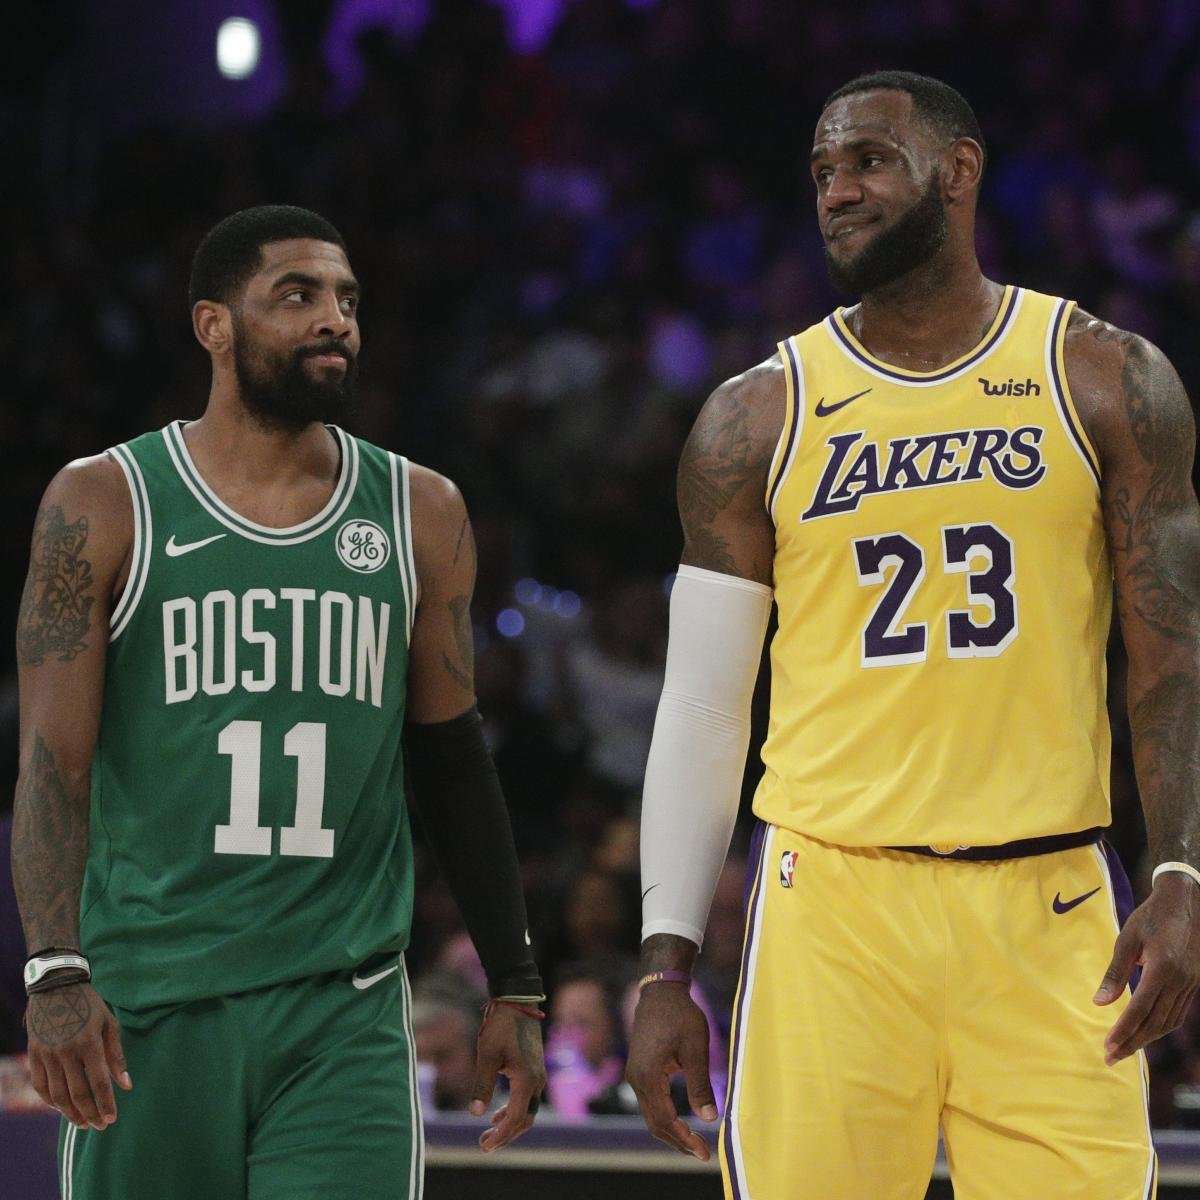 image for Windhorst: Kyrie Irving 'Has Had Discussions' About Joining LeBron James, Lakers